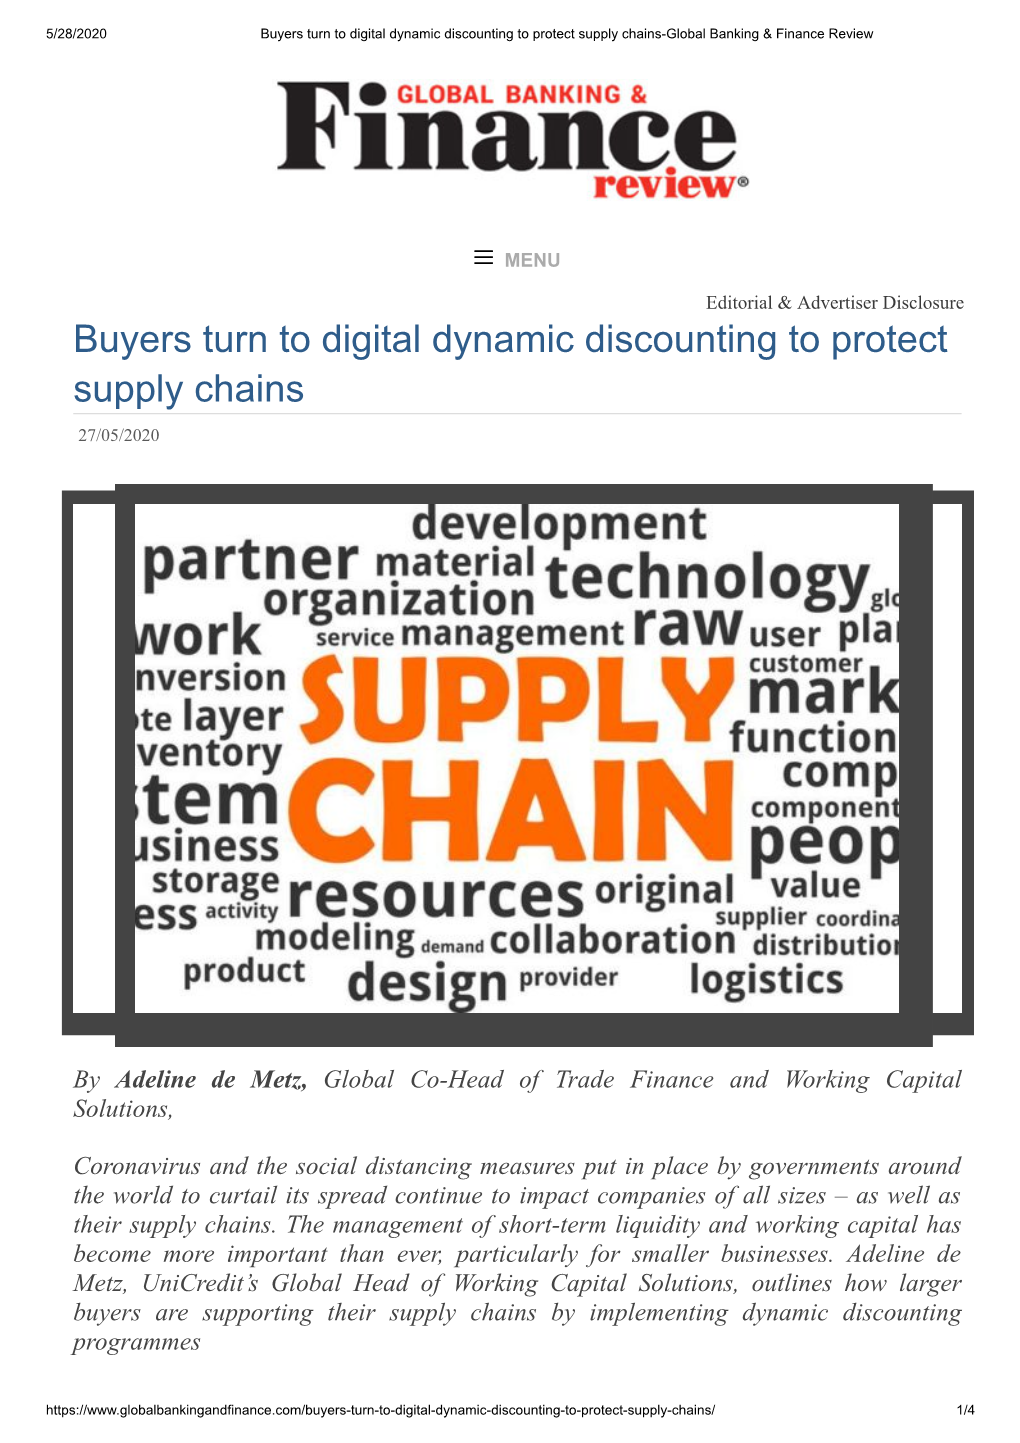 Buyers Turn to Digital Dynamic Discounting to Protect Supply Chains-Global Banking & Finance Review